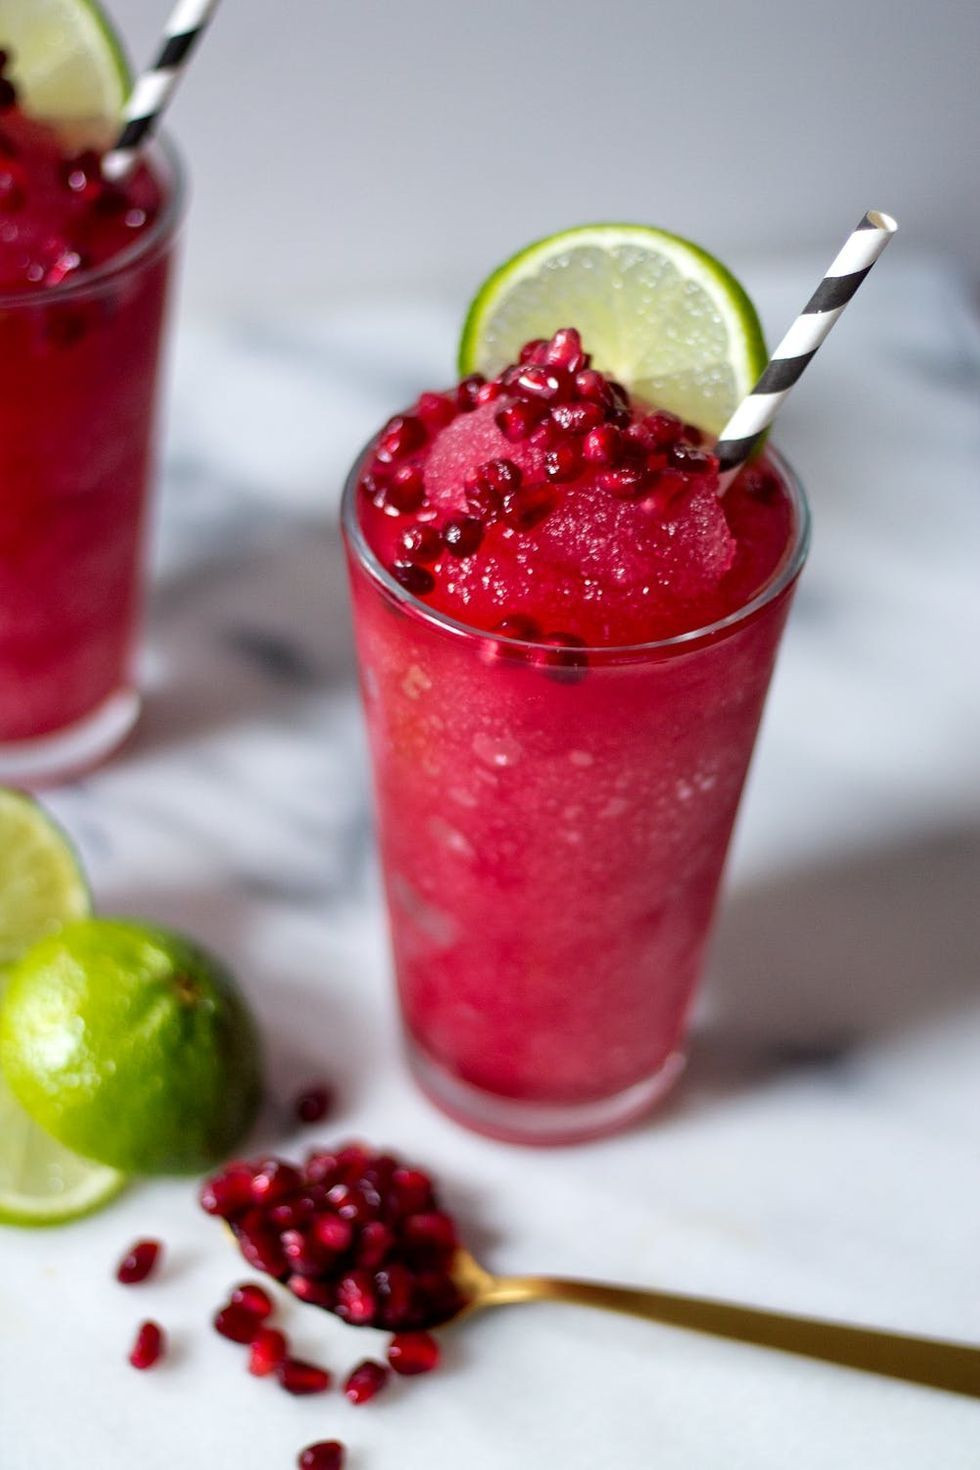 Pomegranate Cocktails Recipes
 15 Juicy Pomegranate Cocktail Recipes to Ring in the New